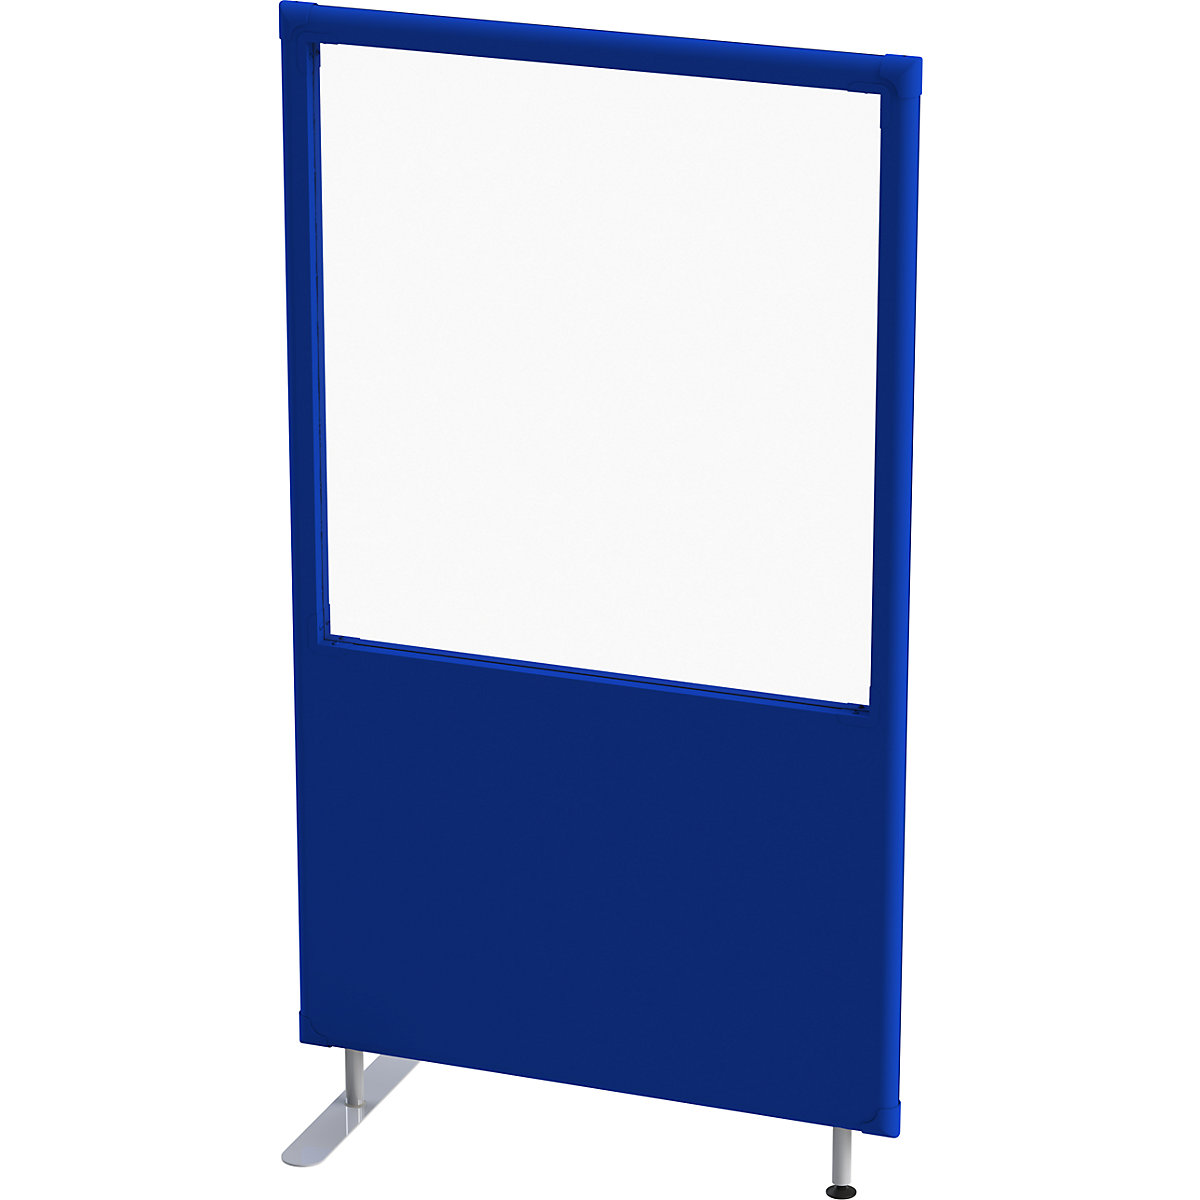 Soundproof partition – eurokraft pro, panel with window, height 1800 mm, width 1000 mm, blue-4